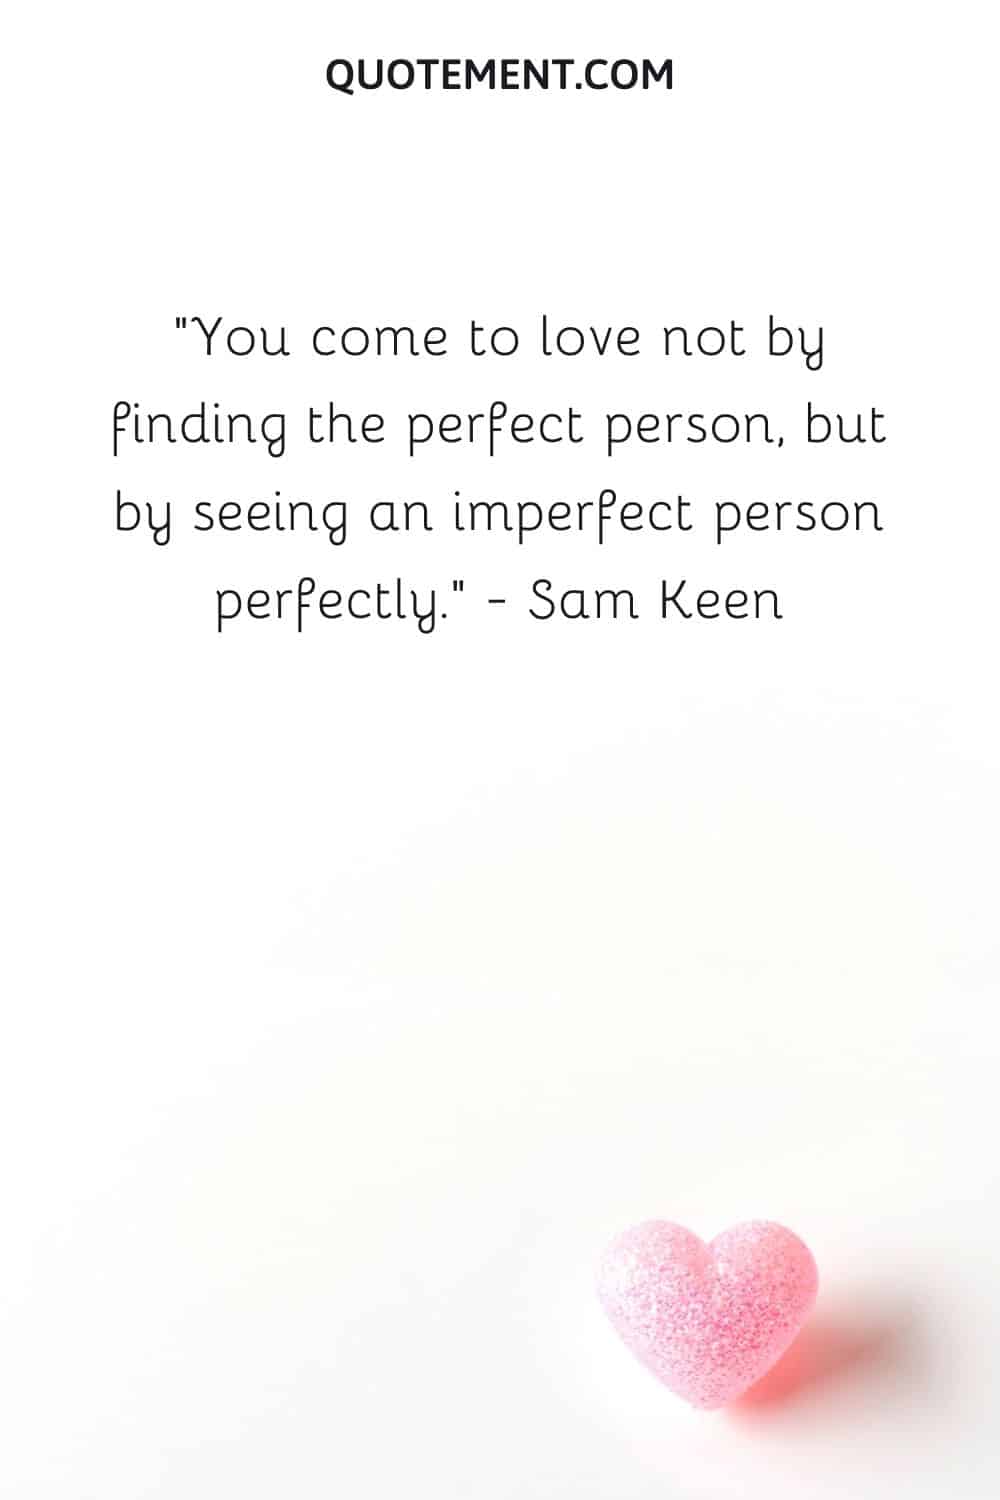 You come to love not by finding the perfect person, but by seeing an imperfect person perfectly.